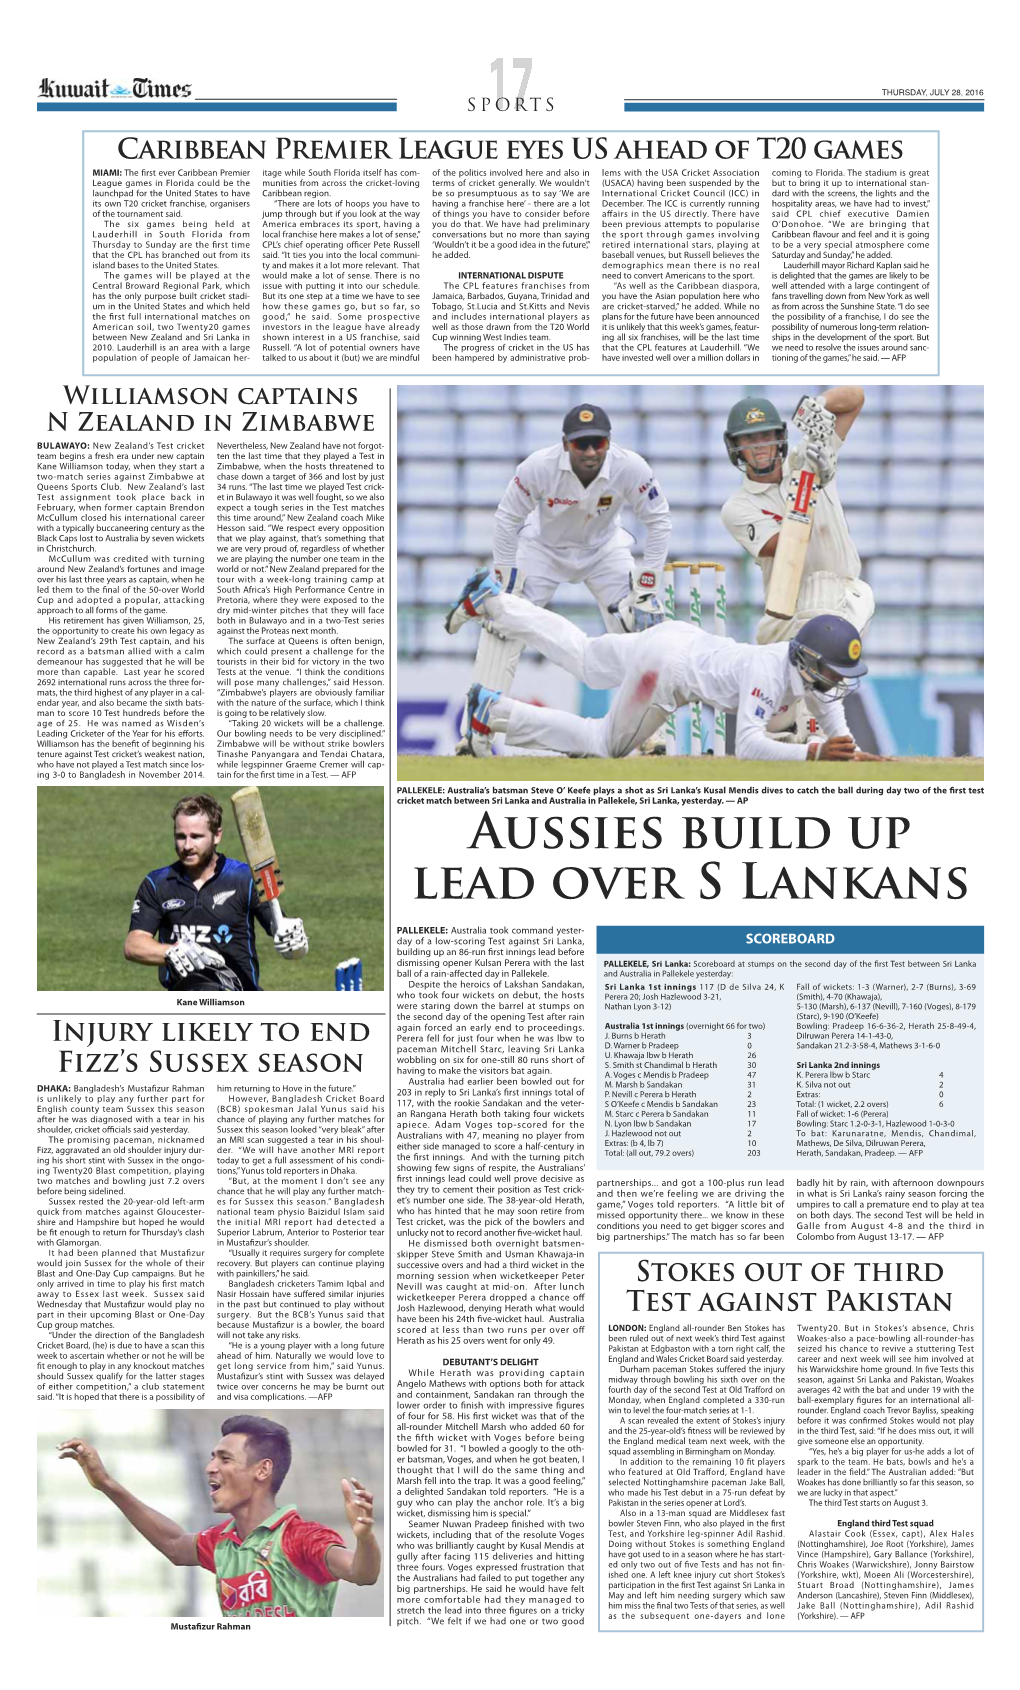 Aussies Build up Lead Over S Lankans